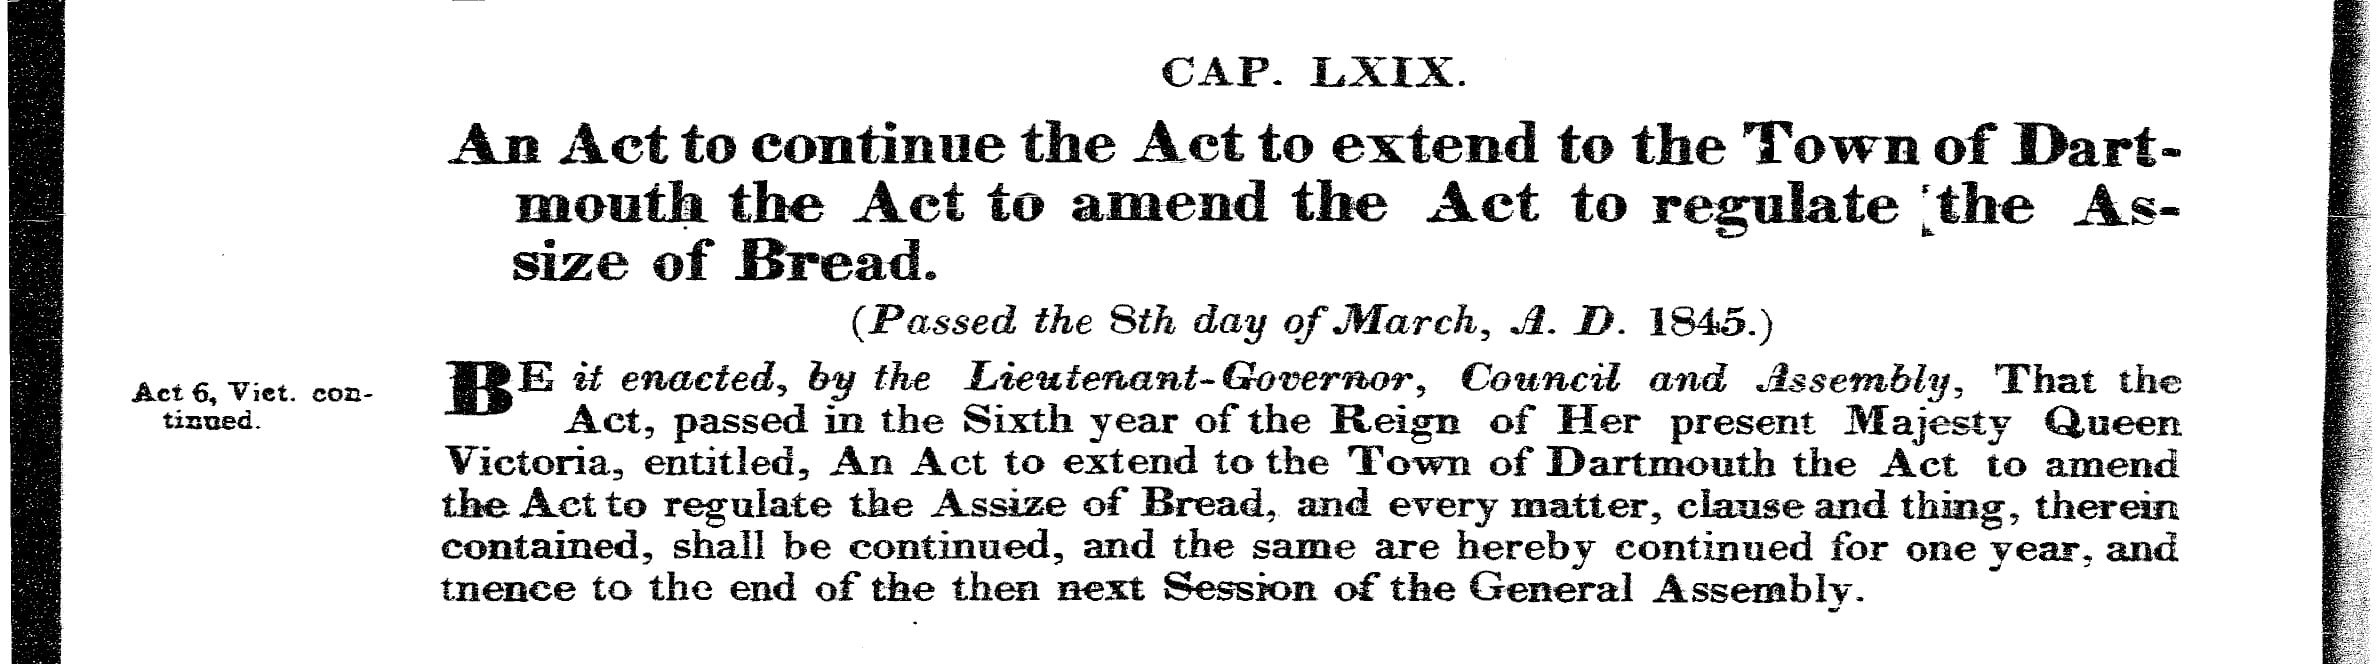 To further continue the same, (To extend the Act to regulate the Assize of Bread to the Town of Dartmouth, 1843 c48) 1845 c69